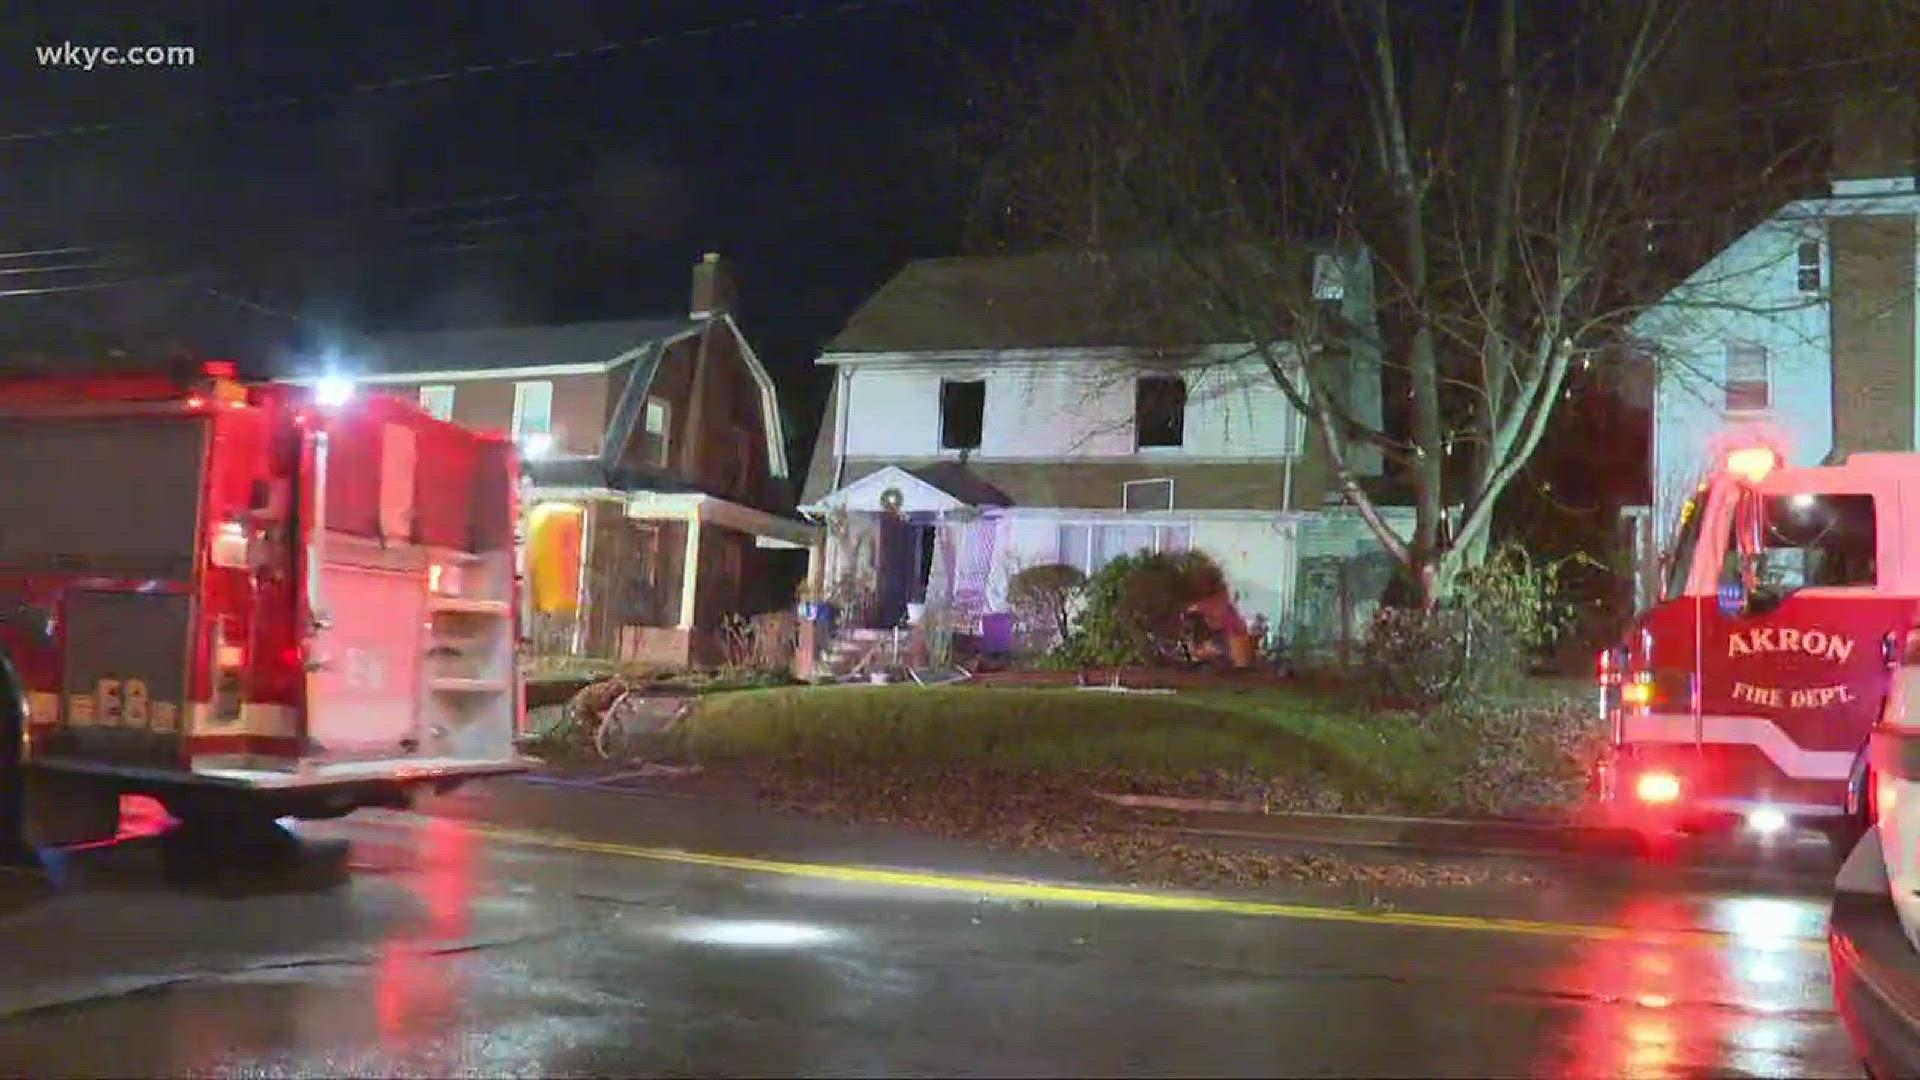 Authorities say 56-year-old Alvin Watkins died after a fire broke out at a home in the 200 block of Rhodes Avenue in Akron.